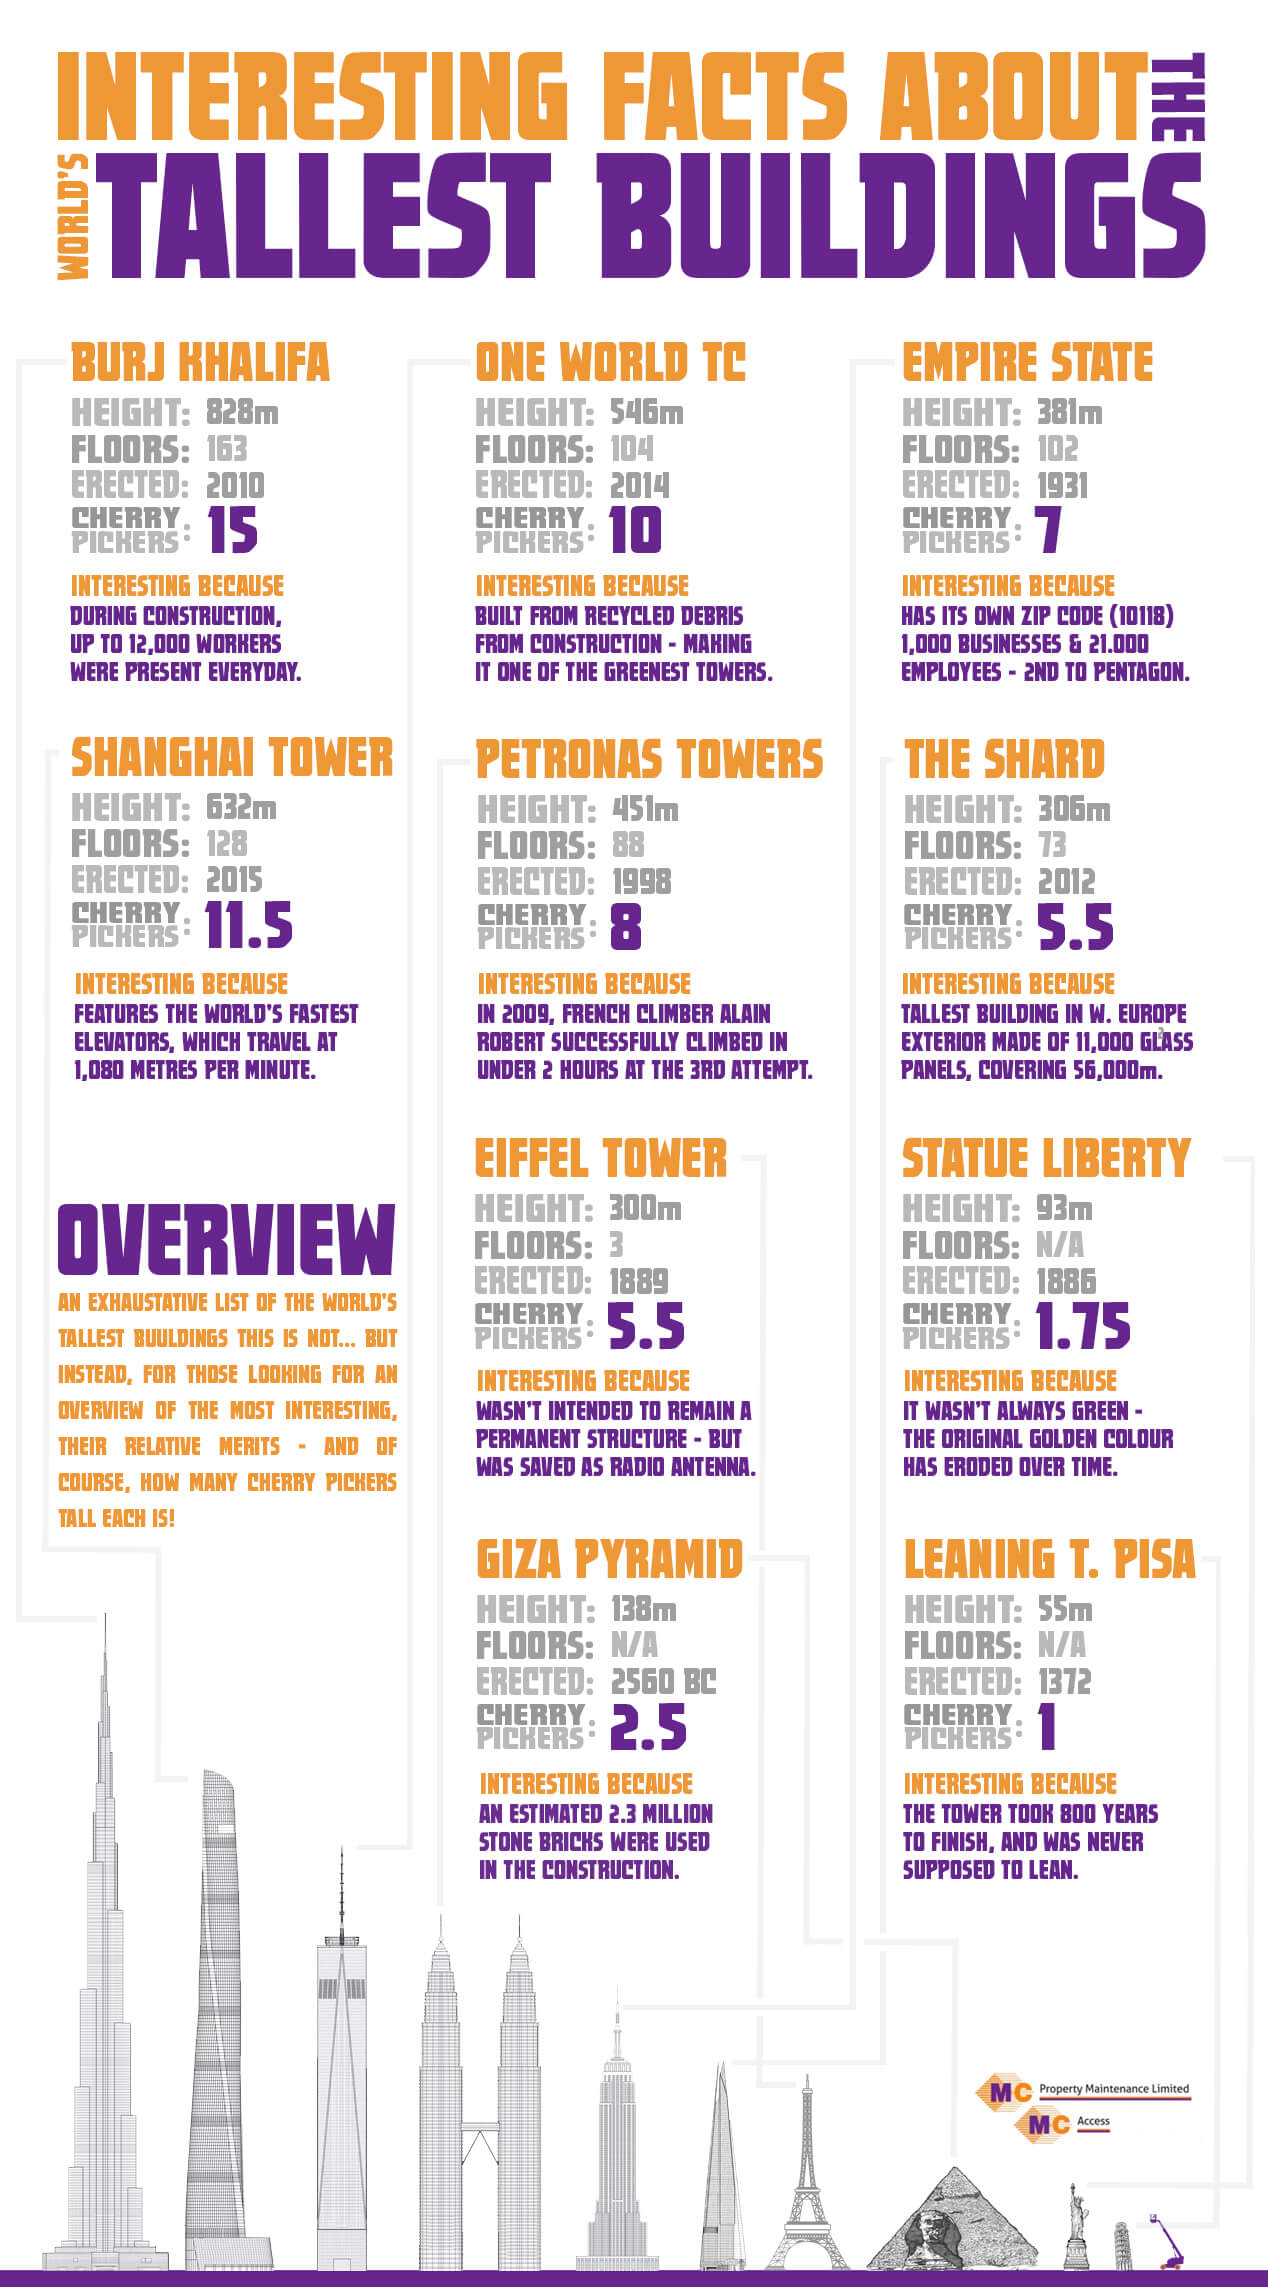 Interesting Facts About the World's Tallest Buildings